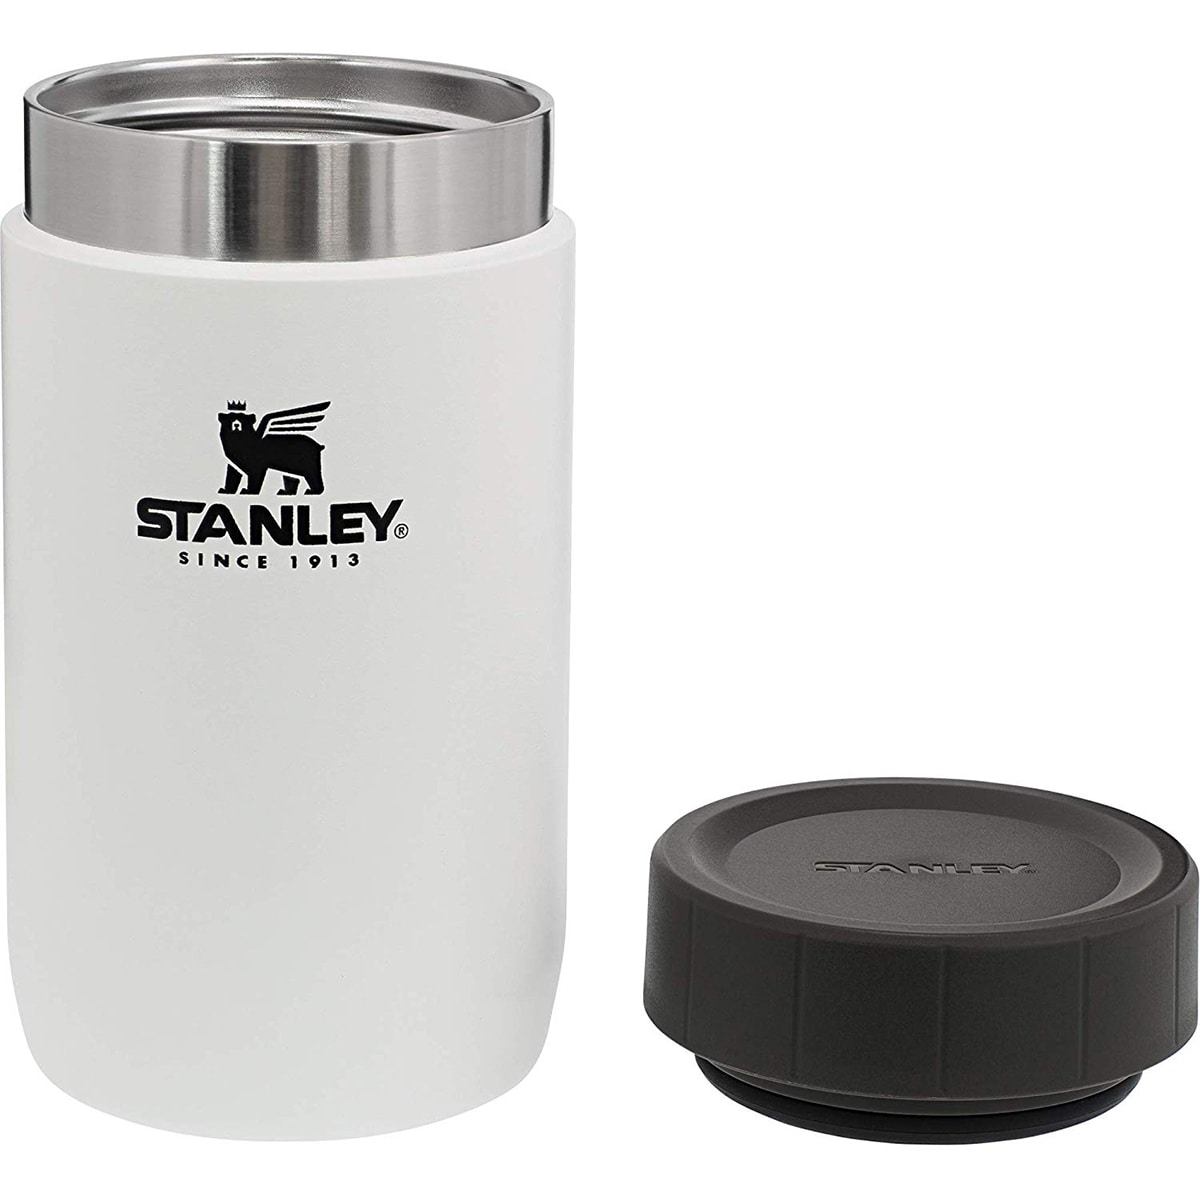 https://ak1.ostkcdn.com/images/products/is/images/direct/754037f94d4bc5f5b81c05c0a4620779477705ed/Stanley-14-oz.-Adventure-Stainless-Steel-Vacuum-Insulated-Food-Jar---Polar.jpg